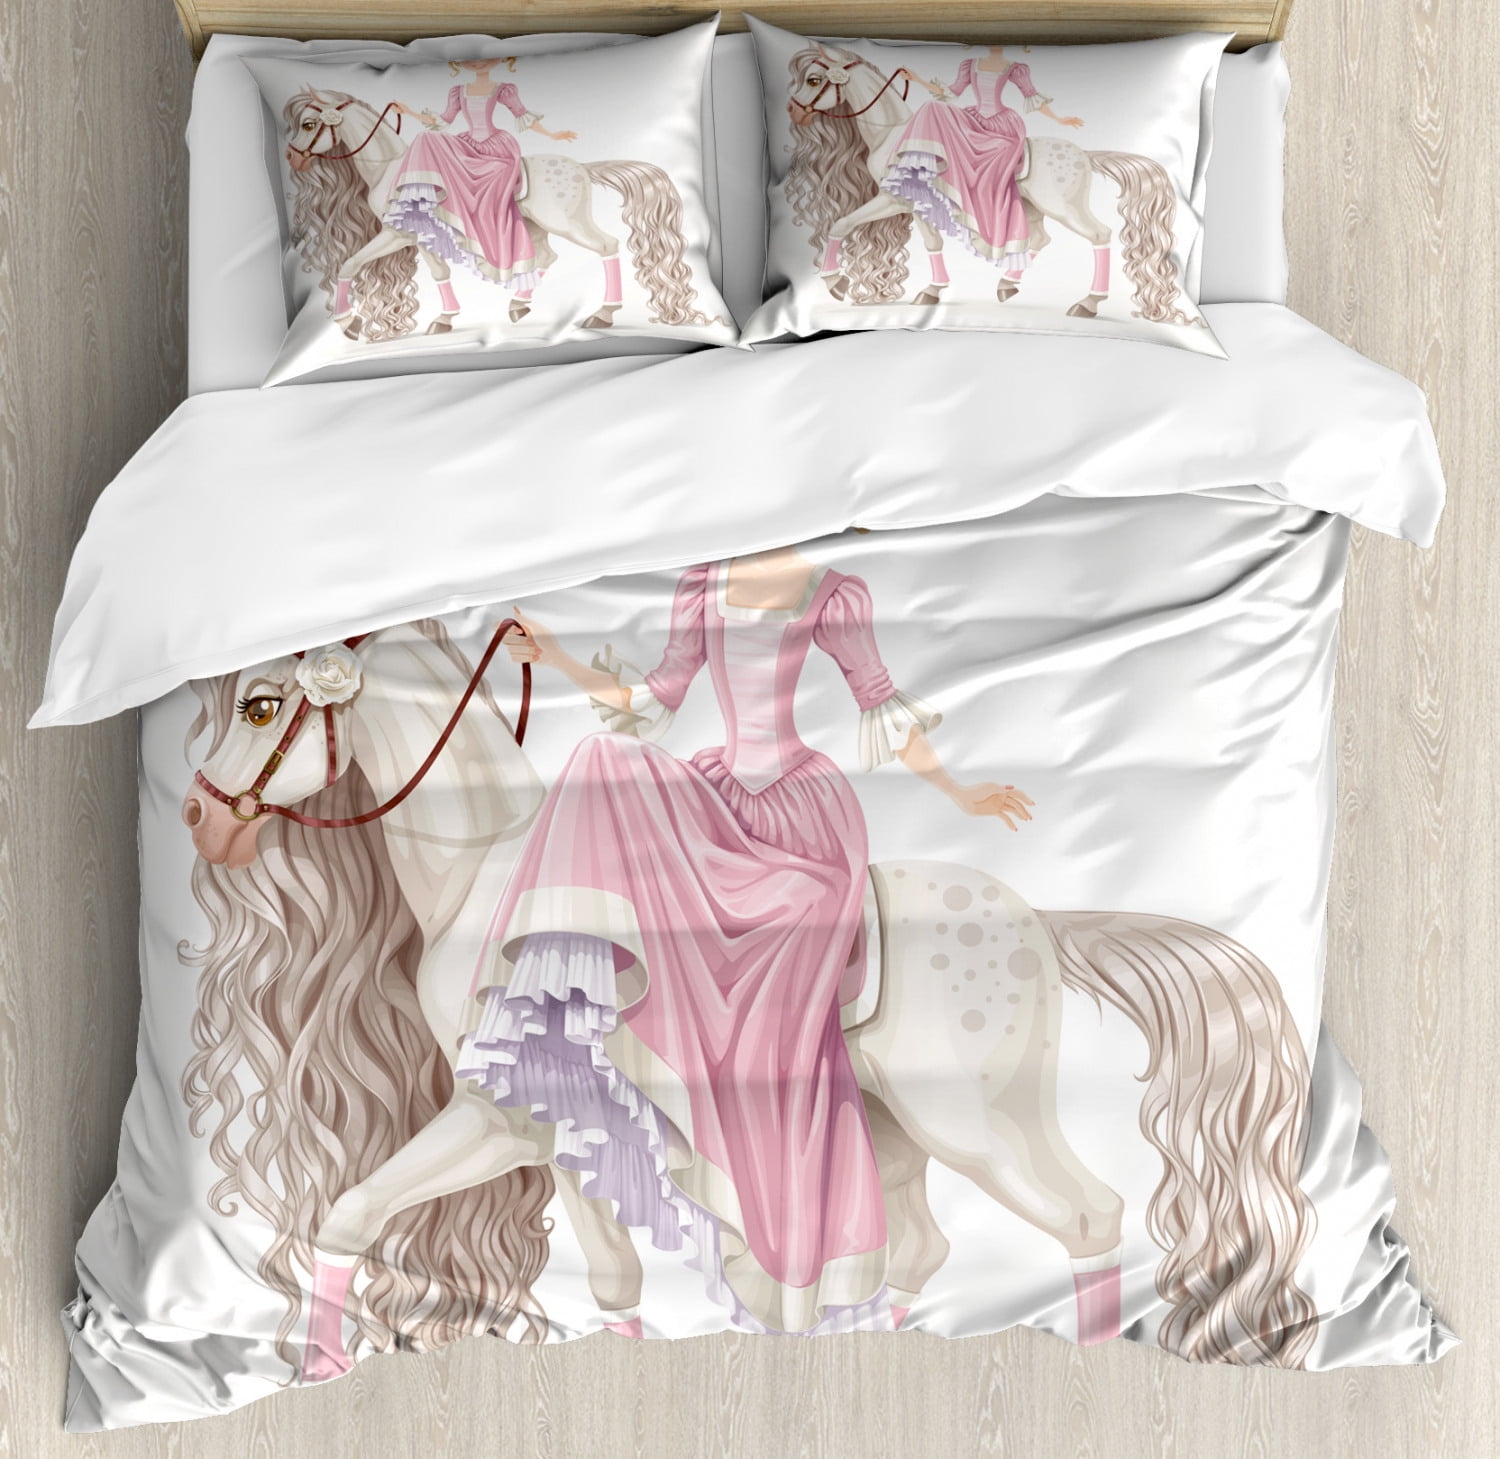 Cute Duvet Cover Pink Animals Duvet Cover Queen Twin King Single Bedding Set Kid Teen Adult Girls Ladies Bedroom Decor Bed Set Quilt Cover